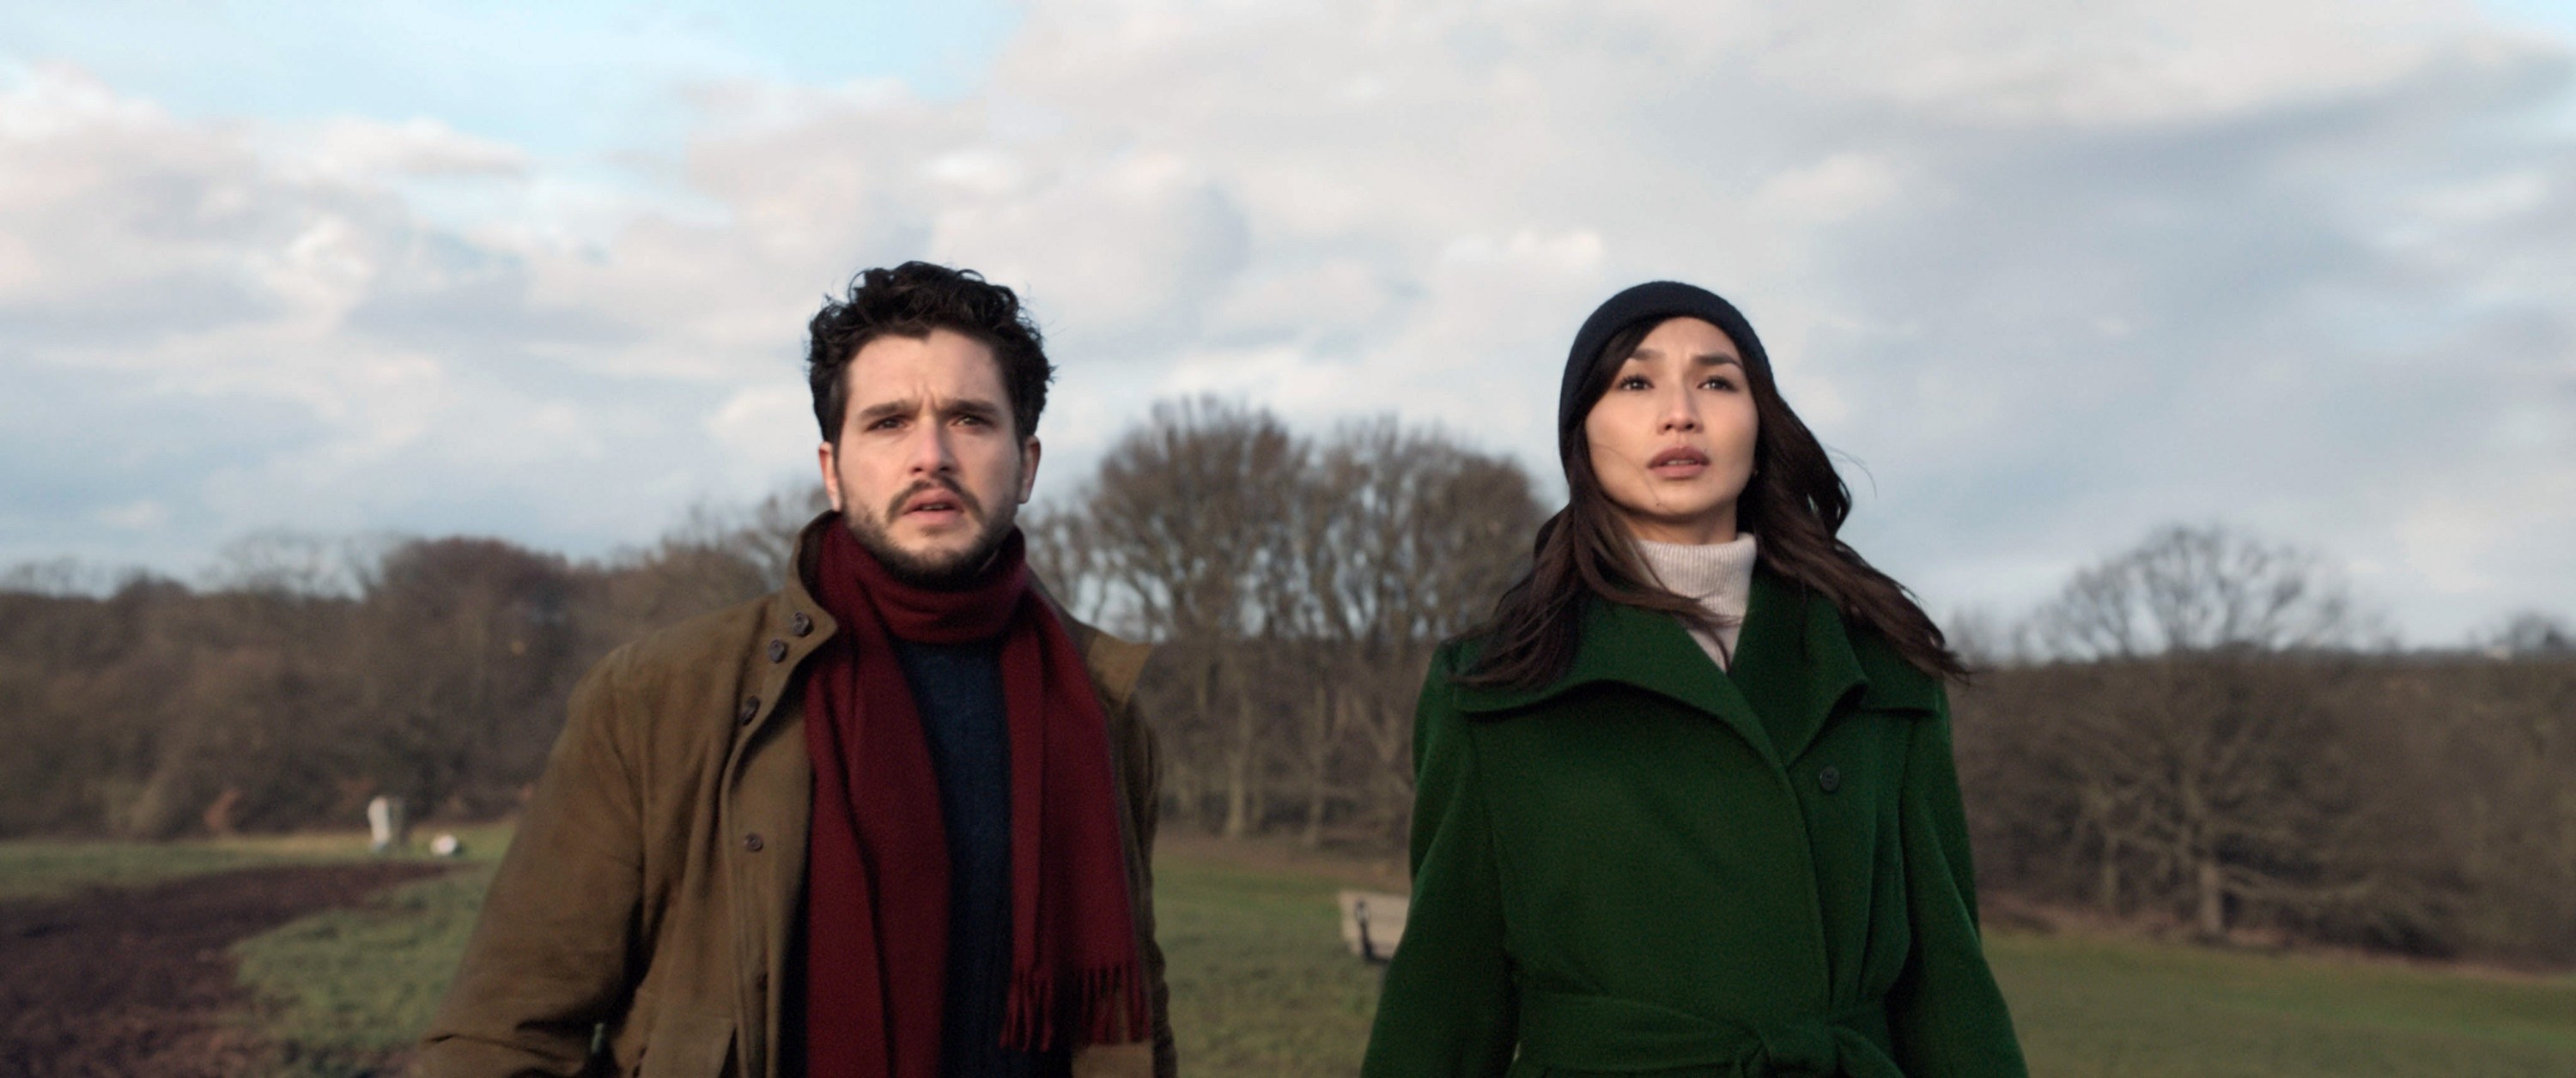 dressed in winter coats, Sersi and Dane gaze into the sky with concern on their faces